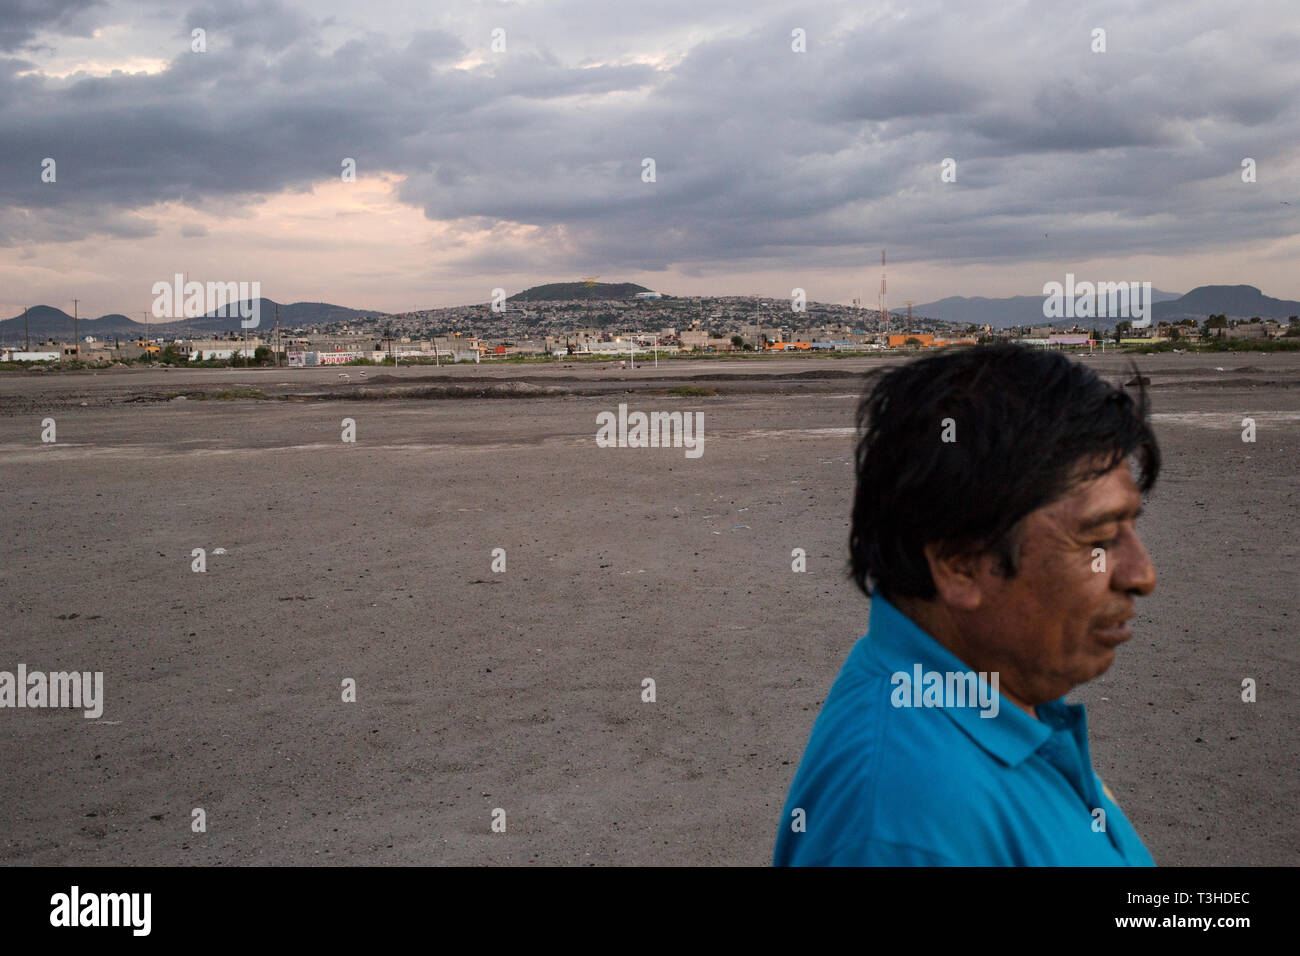 A man walks across an area of land that was once part of Lake Texcoco, in Chimalhuac‡n, the State of Mexico, Mexico, August 24, 2017. A group of local residents are engaged in a land dispute over this land, which they call ÒTlatelesÓ, or Òmountain of sandÓ which the Mexican Federal Government wanted to use for the new Mexico City International Airport project. Mexico's newly elected president Andreas Lopez Manuel Obrador cancelled this project in the fall of 2018, while it was in the middle of construction. The airport was set to replace the aging Benito Juarez International Airport. Stock Photo